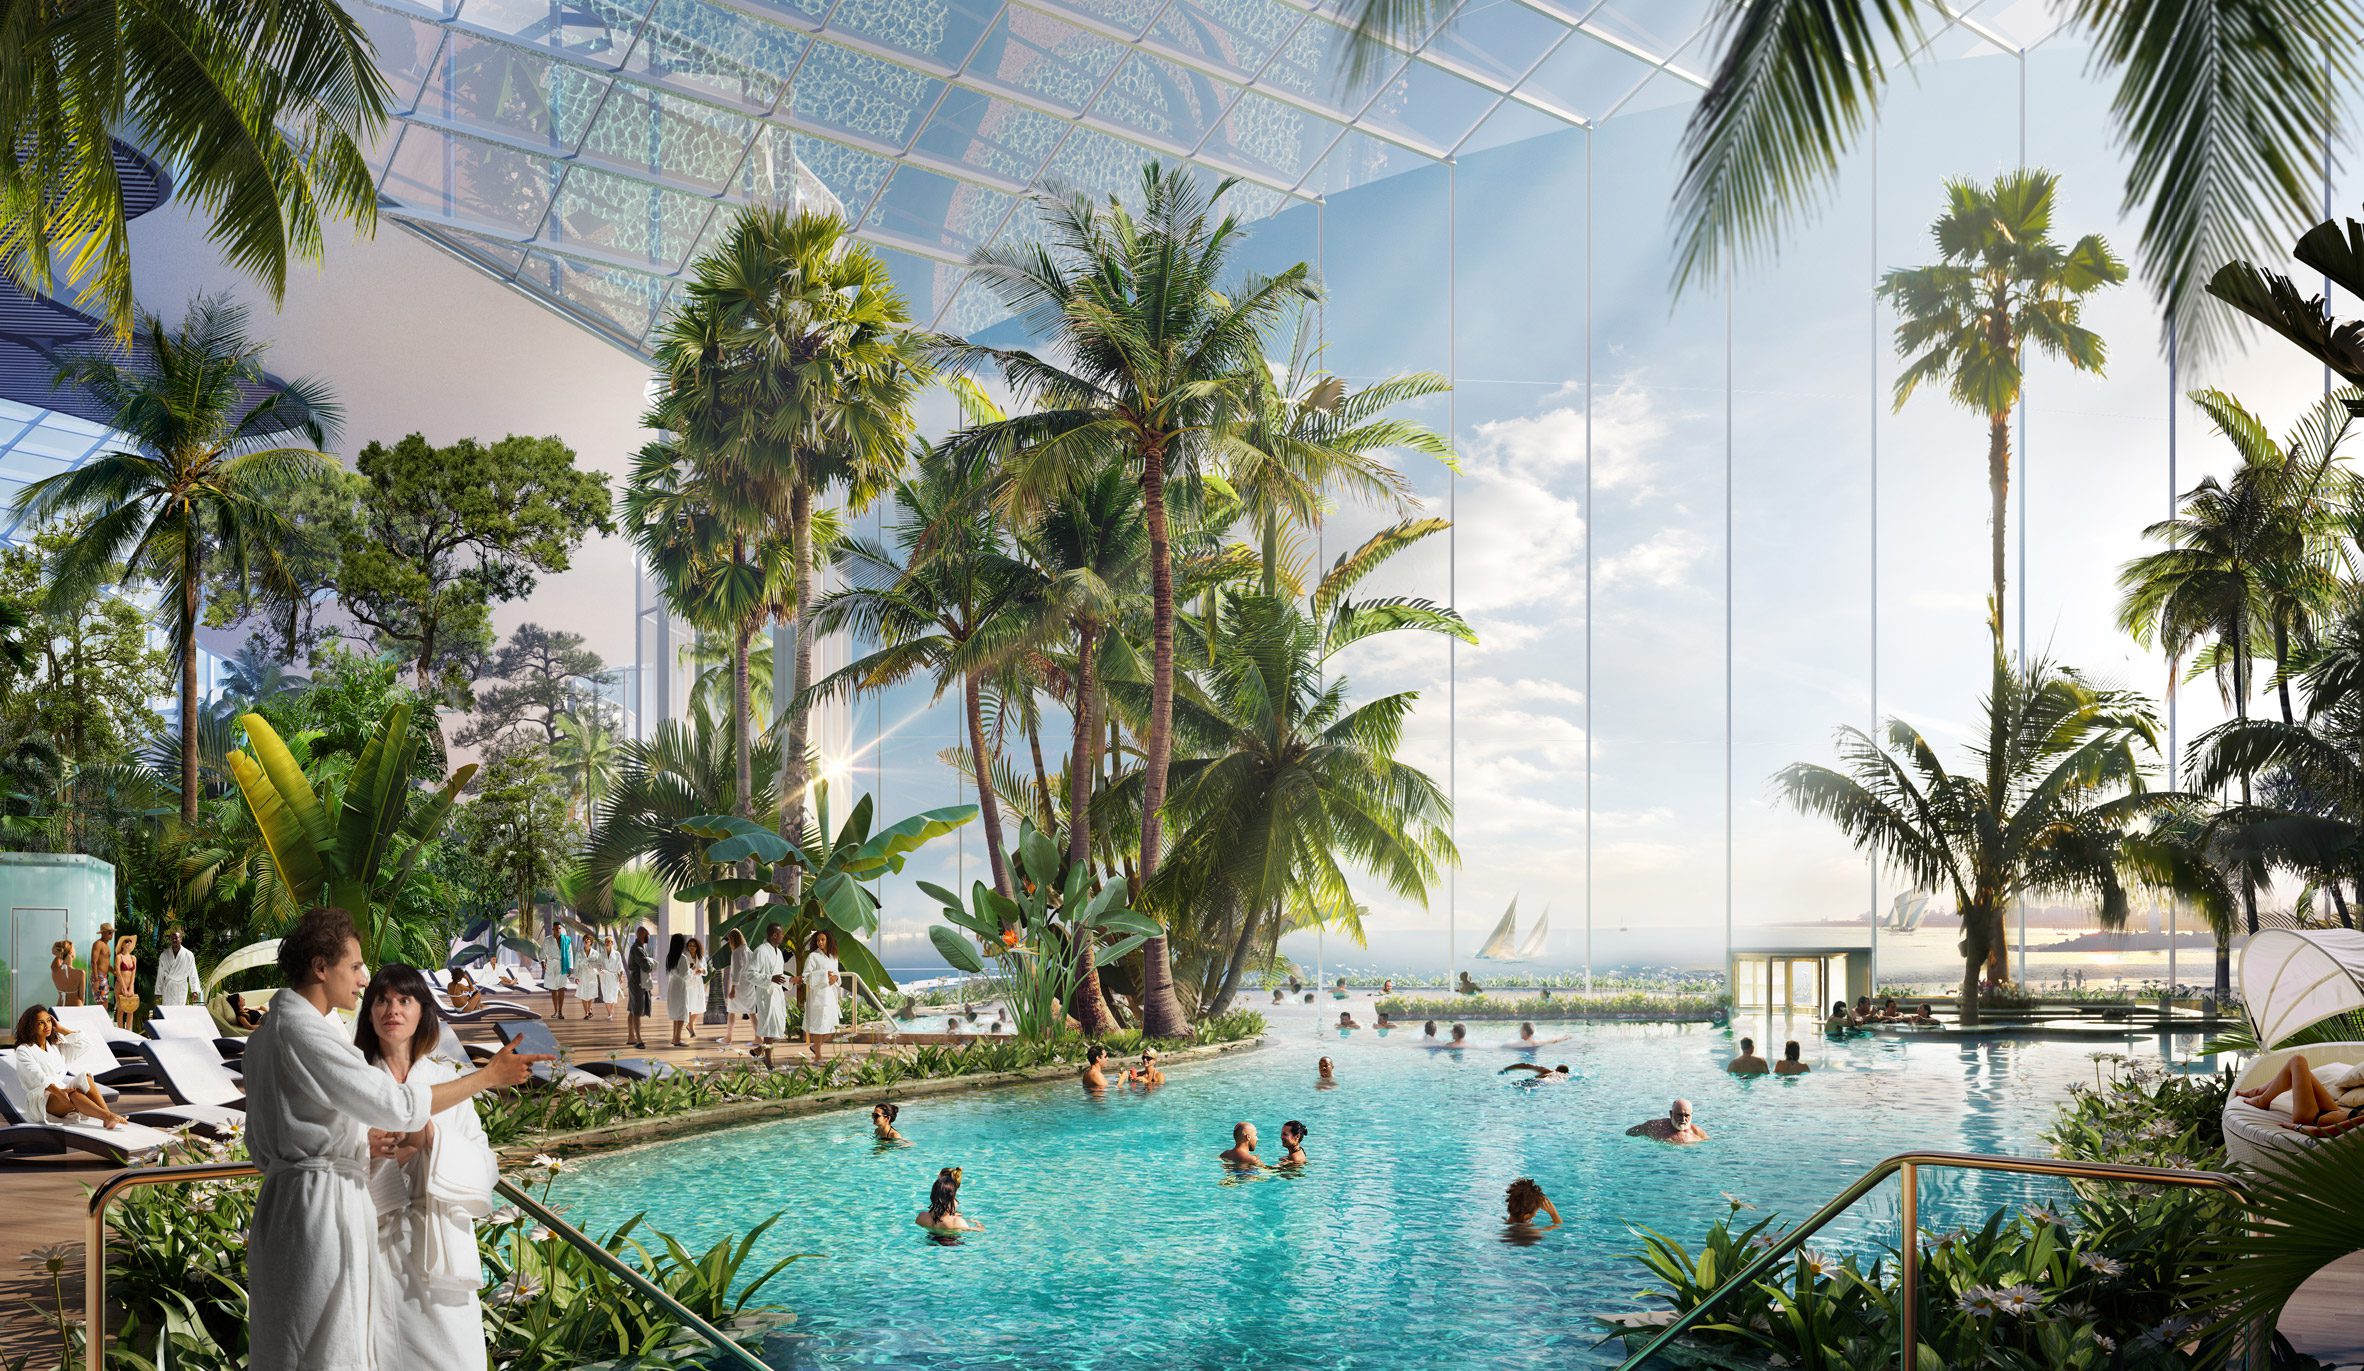 Toronto's Ontario Place is being turned into a water and wellness destination